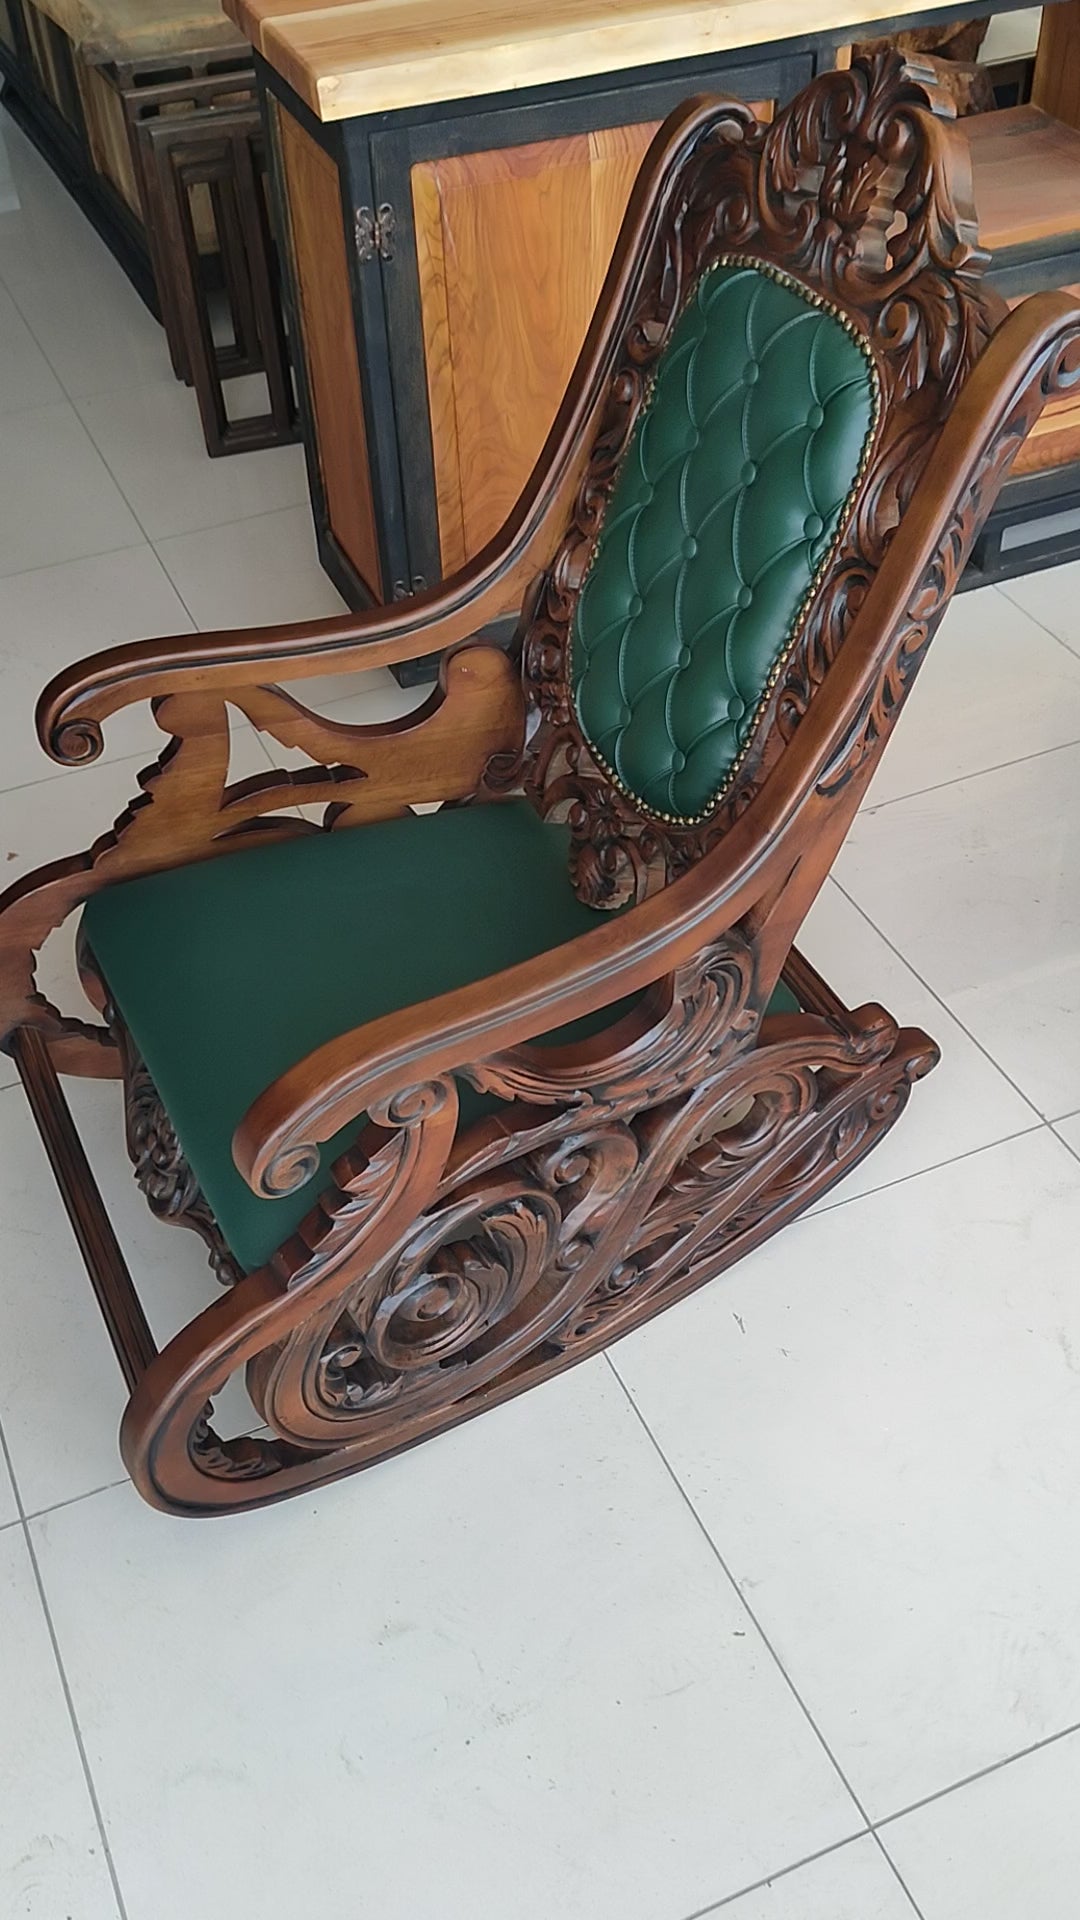 Genuine leather upholstery on antique chair